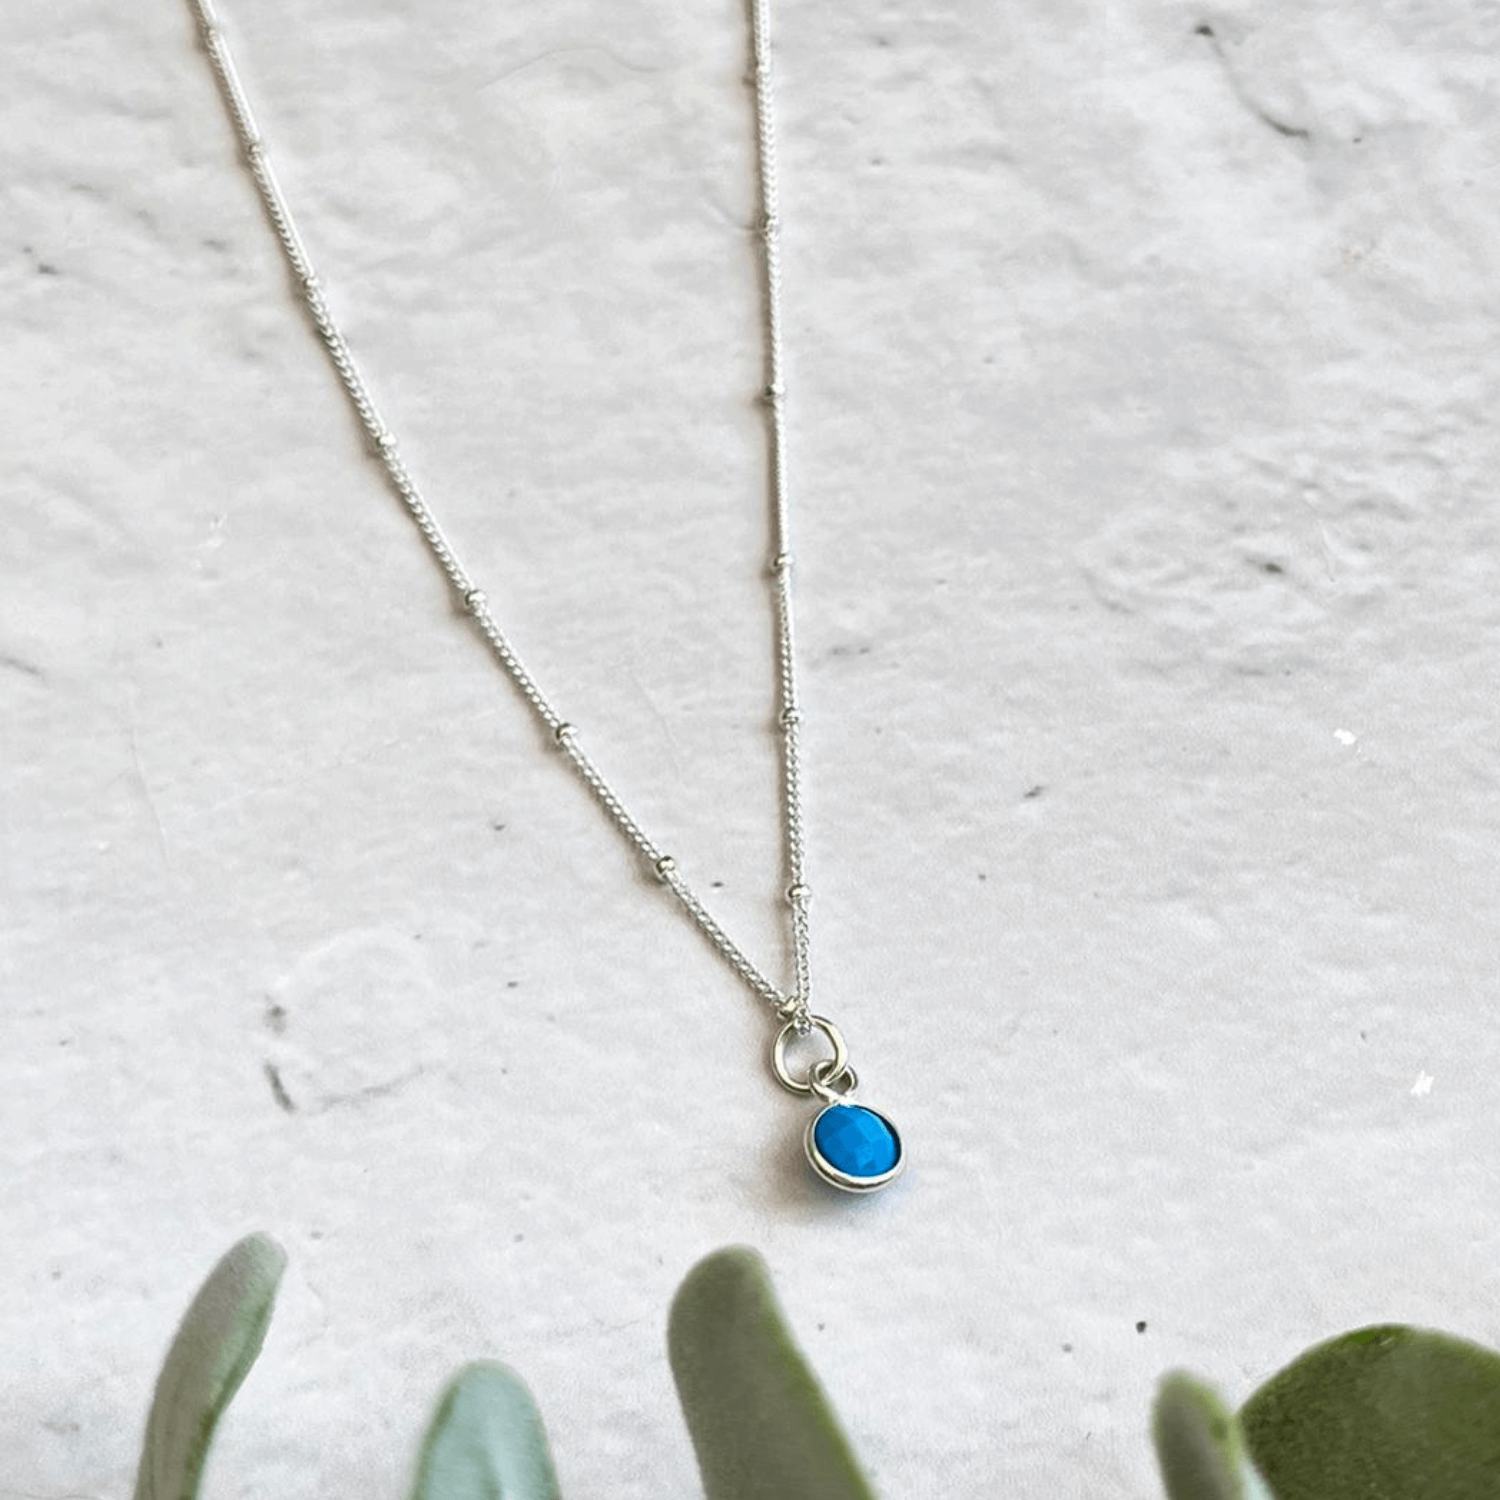 A delicate silver necklace with small beads along the chain. The Made Here with Love Turquoise Dec Birthstone Necklace features a blue gemstone pendant encased in silver. The necklace is laid flat on a light-colored, textured surface, with some green foliage partially visible at the bottom.